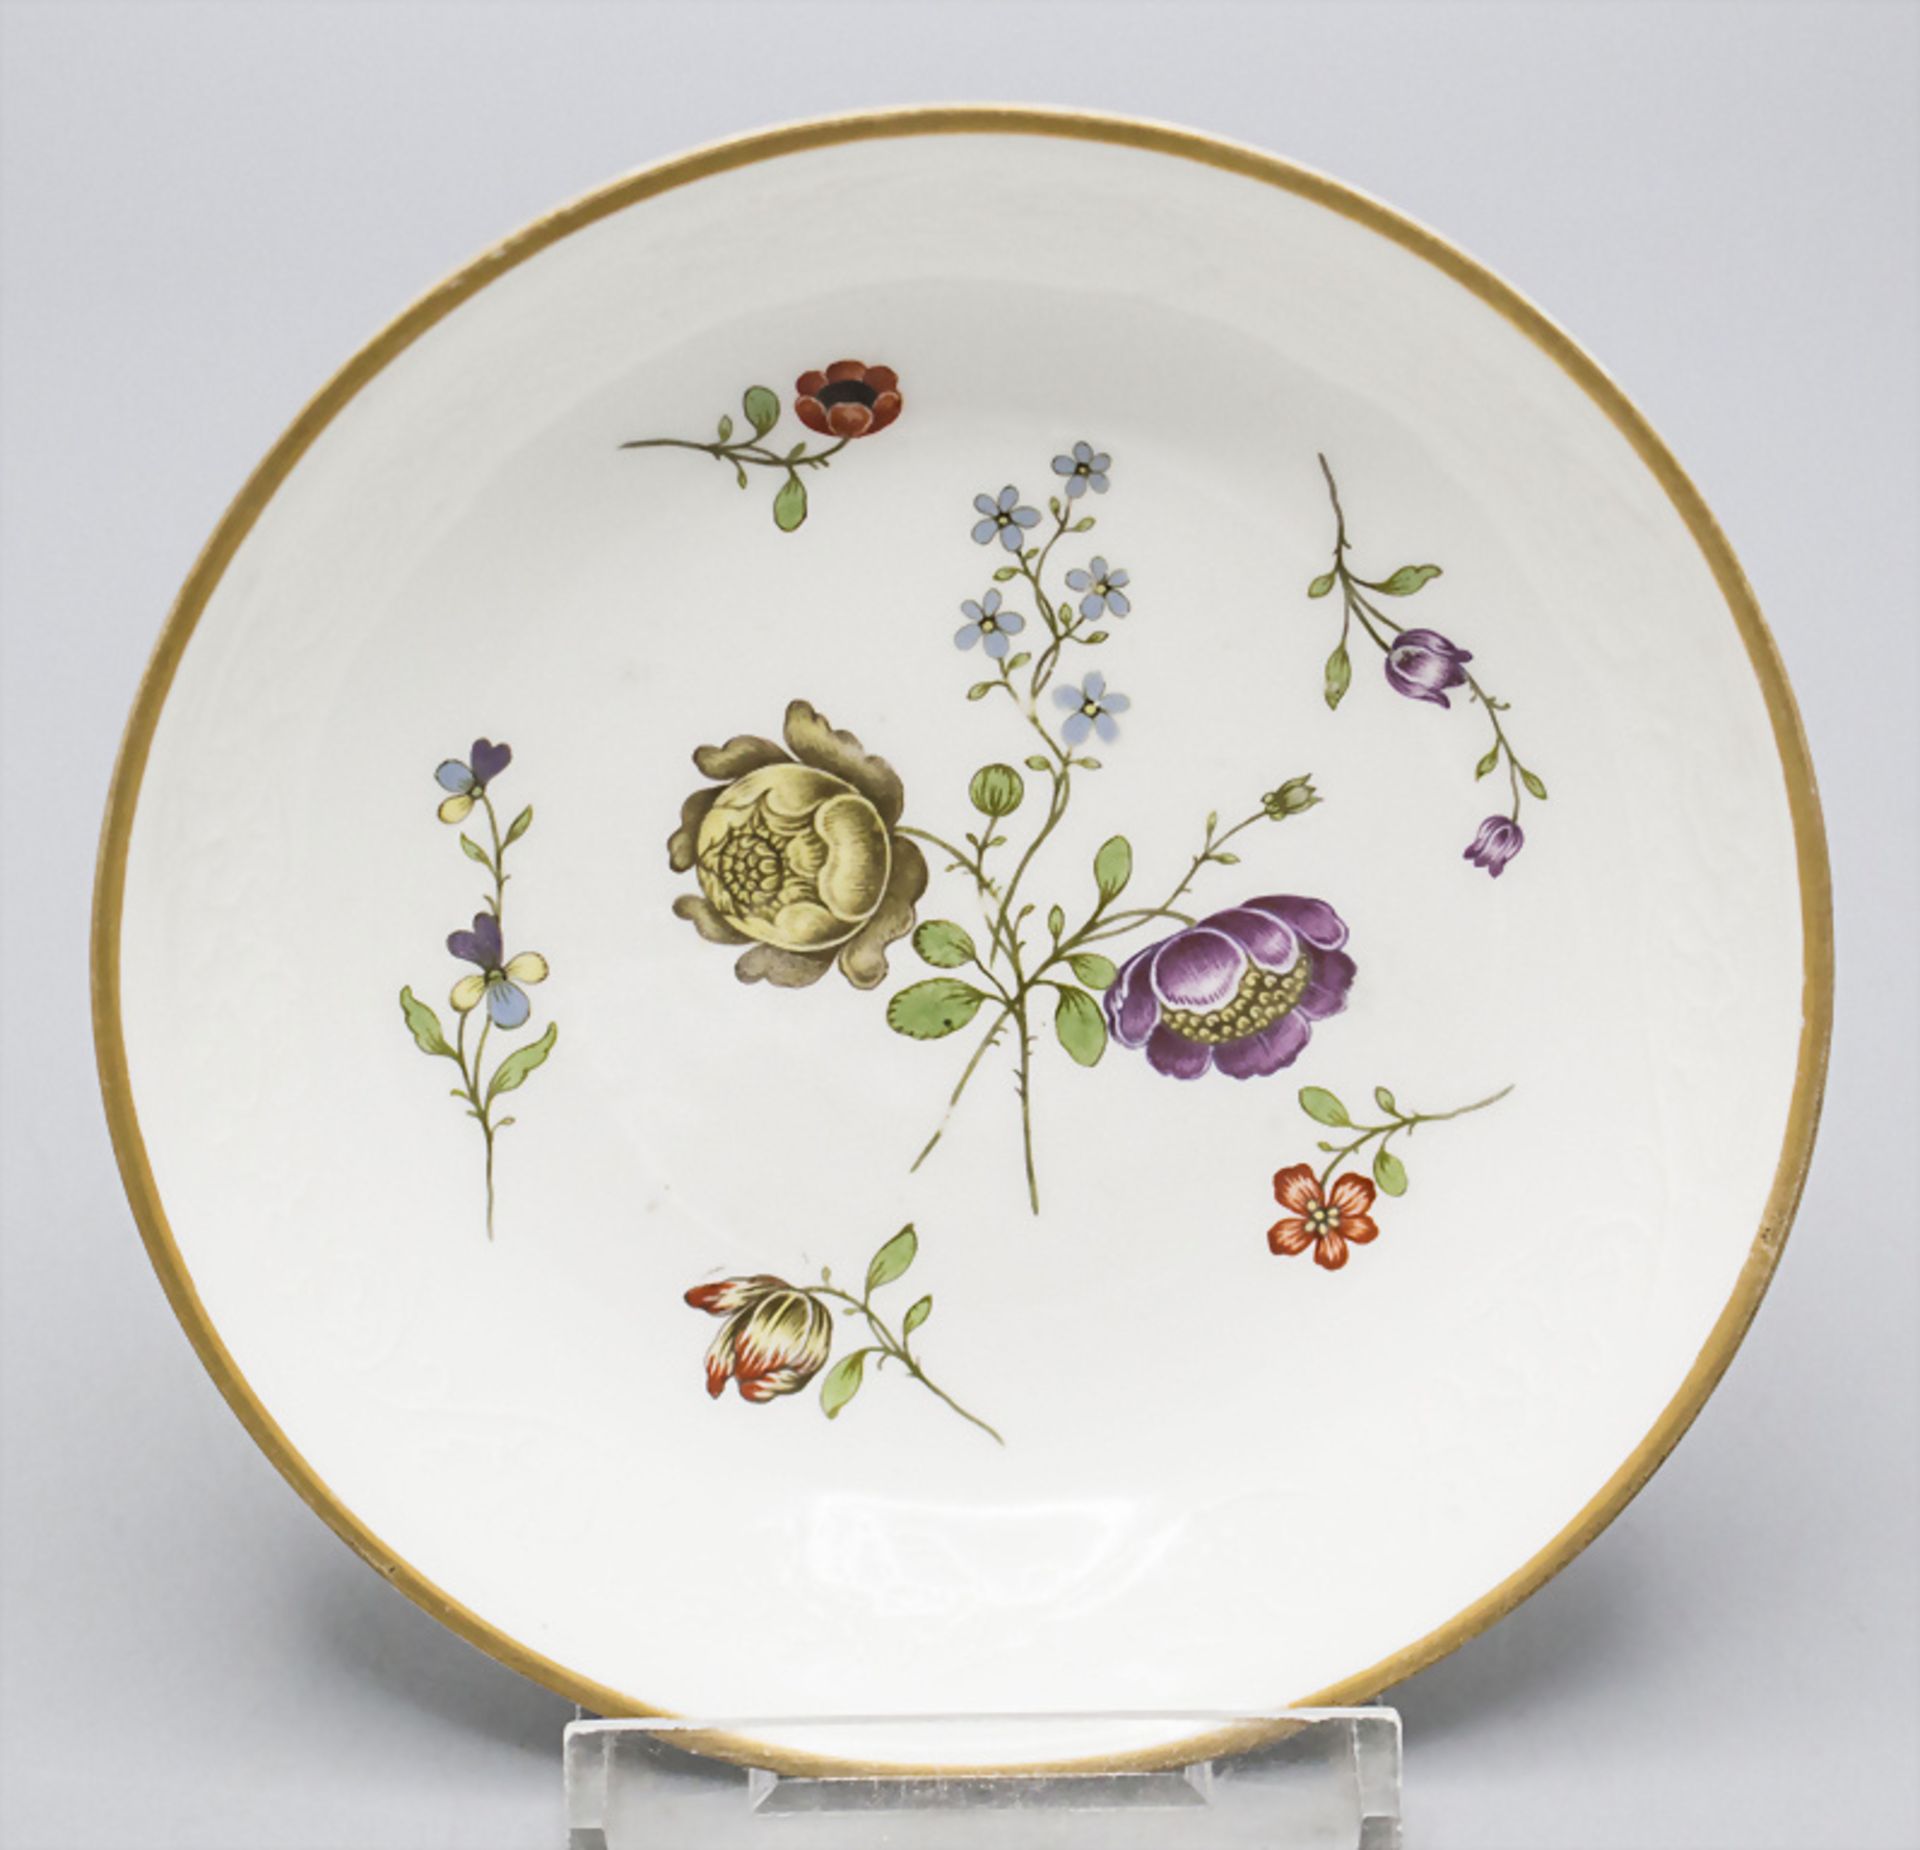 Tasse und Untertasse mit seltener Blumenmalerei / A cup and saucer with rare flower paintings, ... - Image 4 of 6